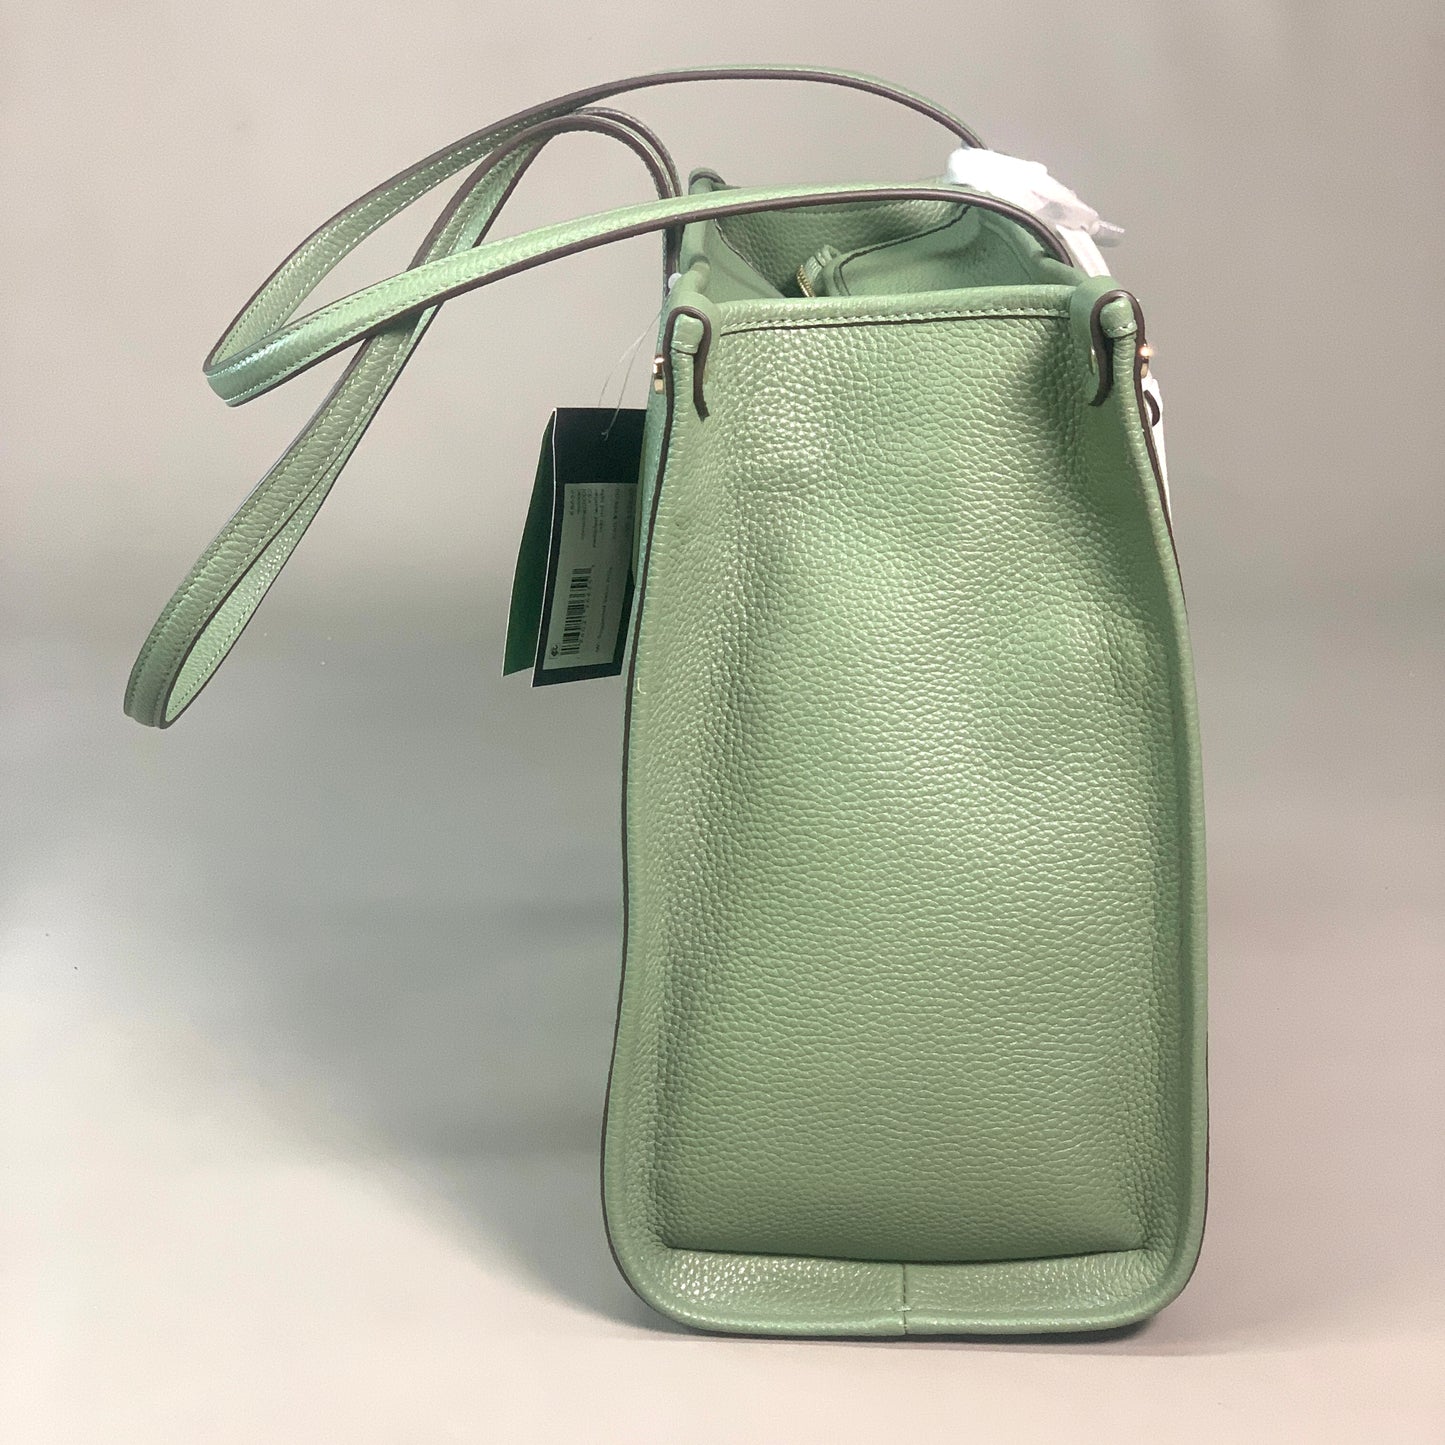 KATE SPADE Market Pebbled Leather Medium Tote Romaine Green Style No. K8638-1 (New)